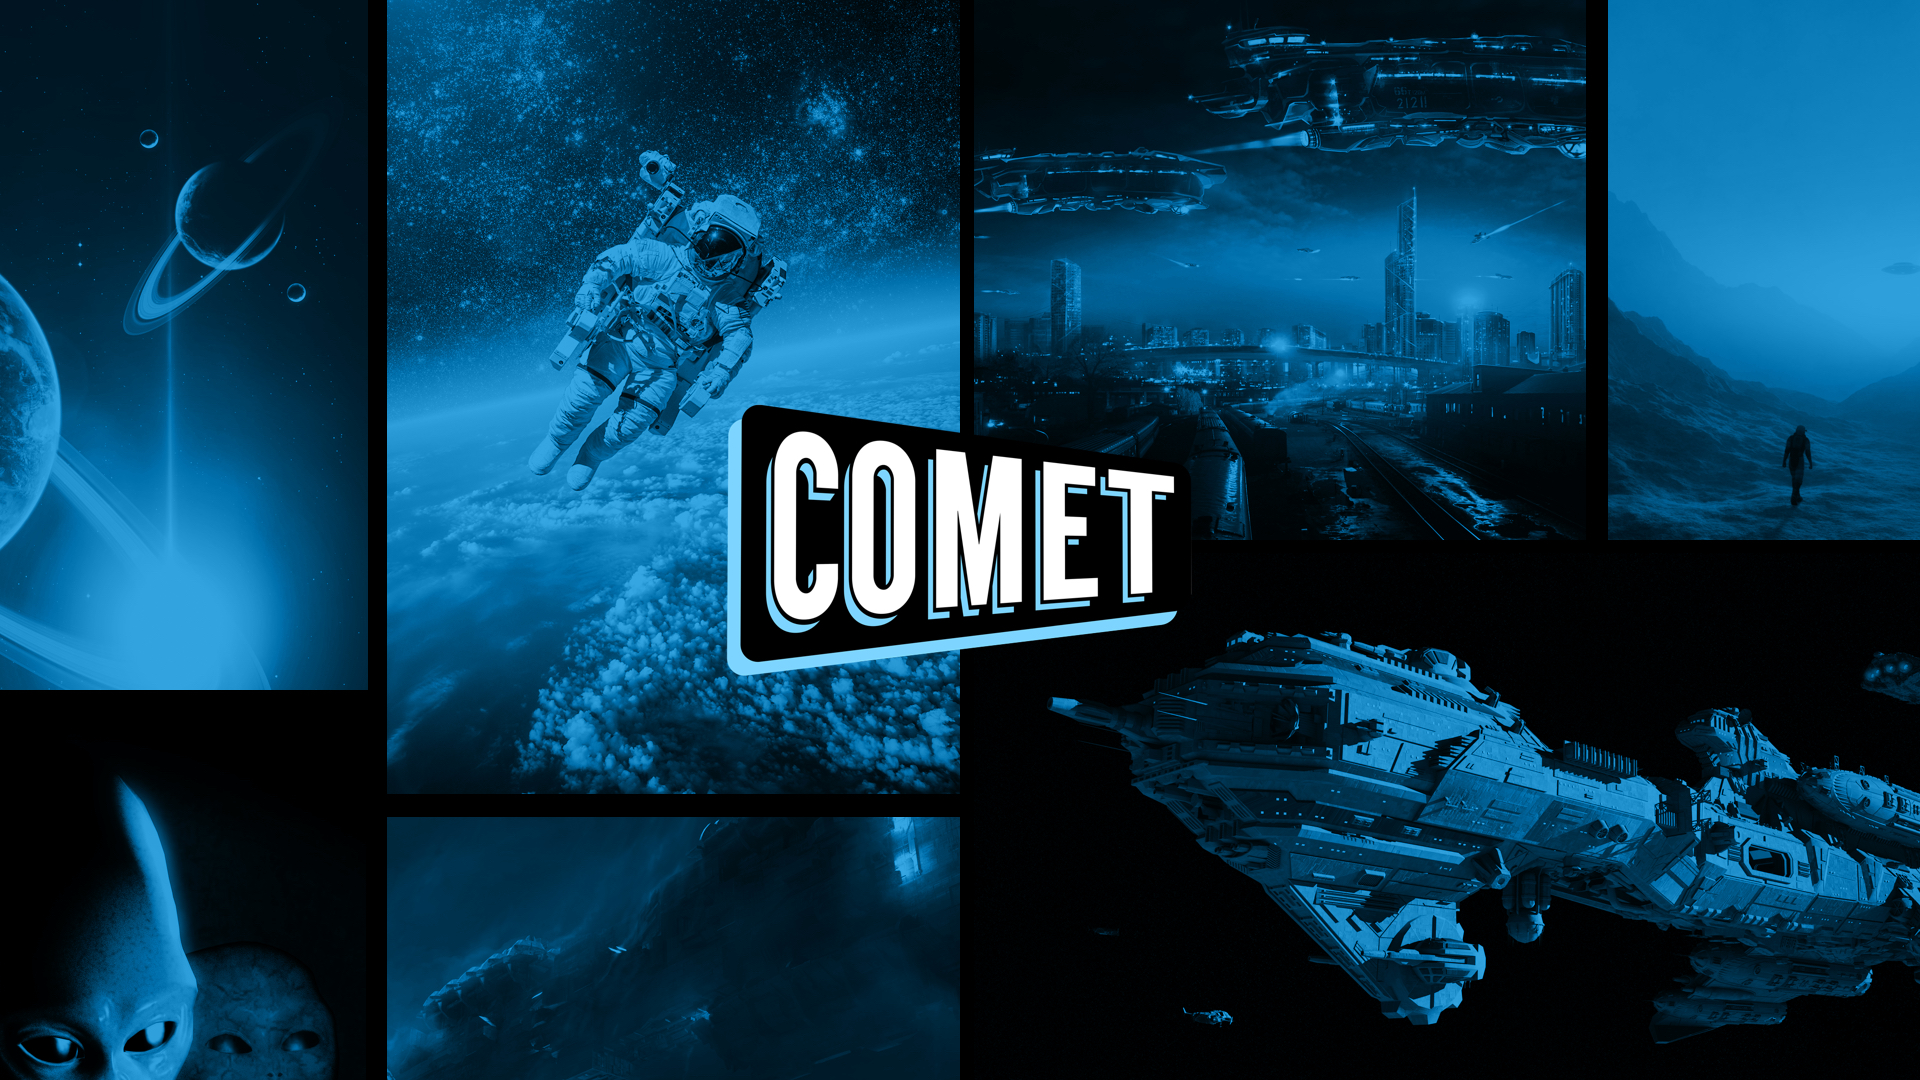 Sinclair Announces New Shows Coming to Comet, CHARGE!, & TBD For Free Including ‘Law & Order: Criminal Intent,’ ‘America’s Funniest Home Videos,’ & More